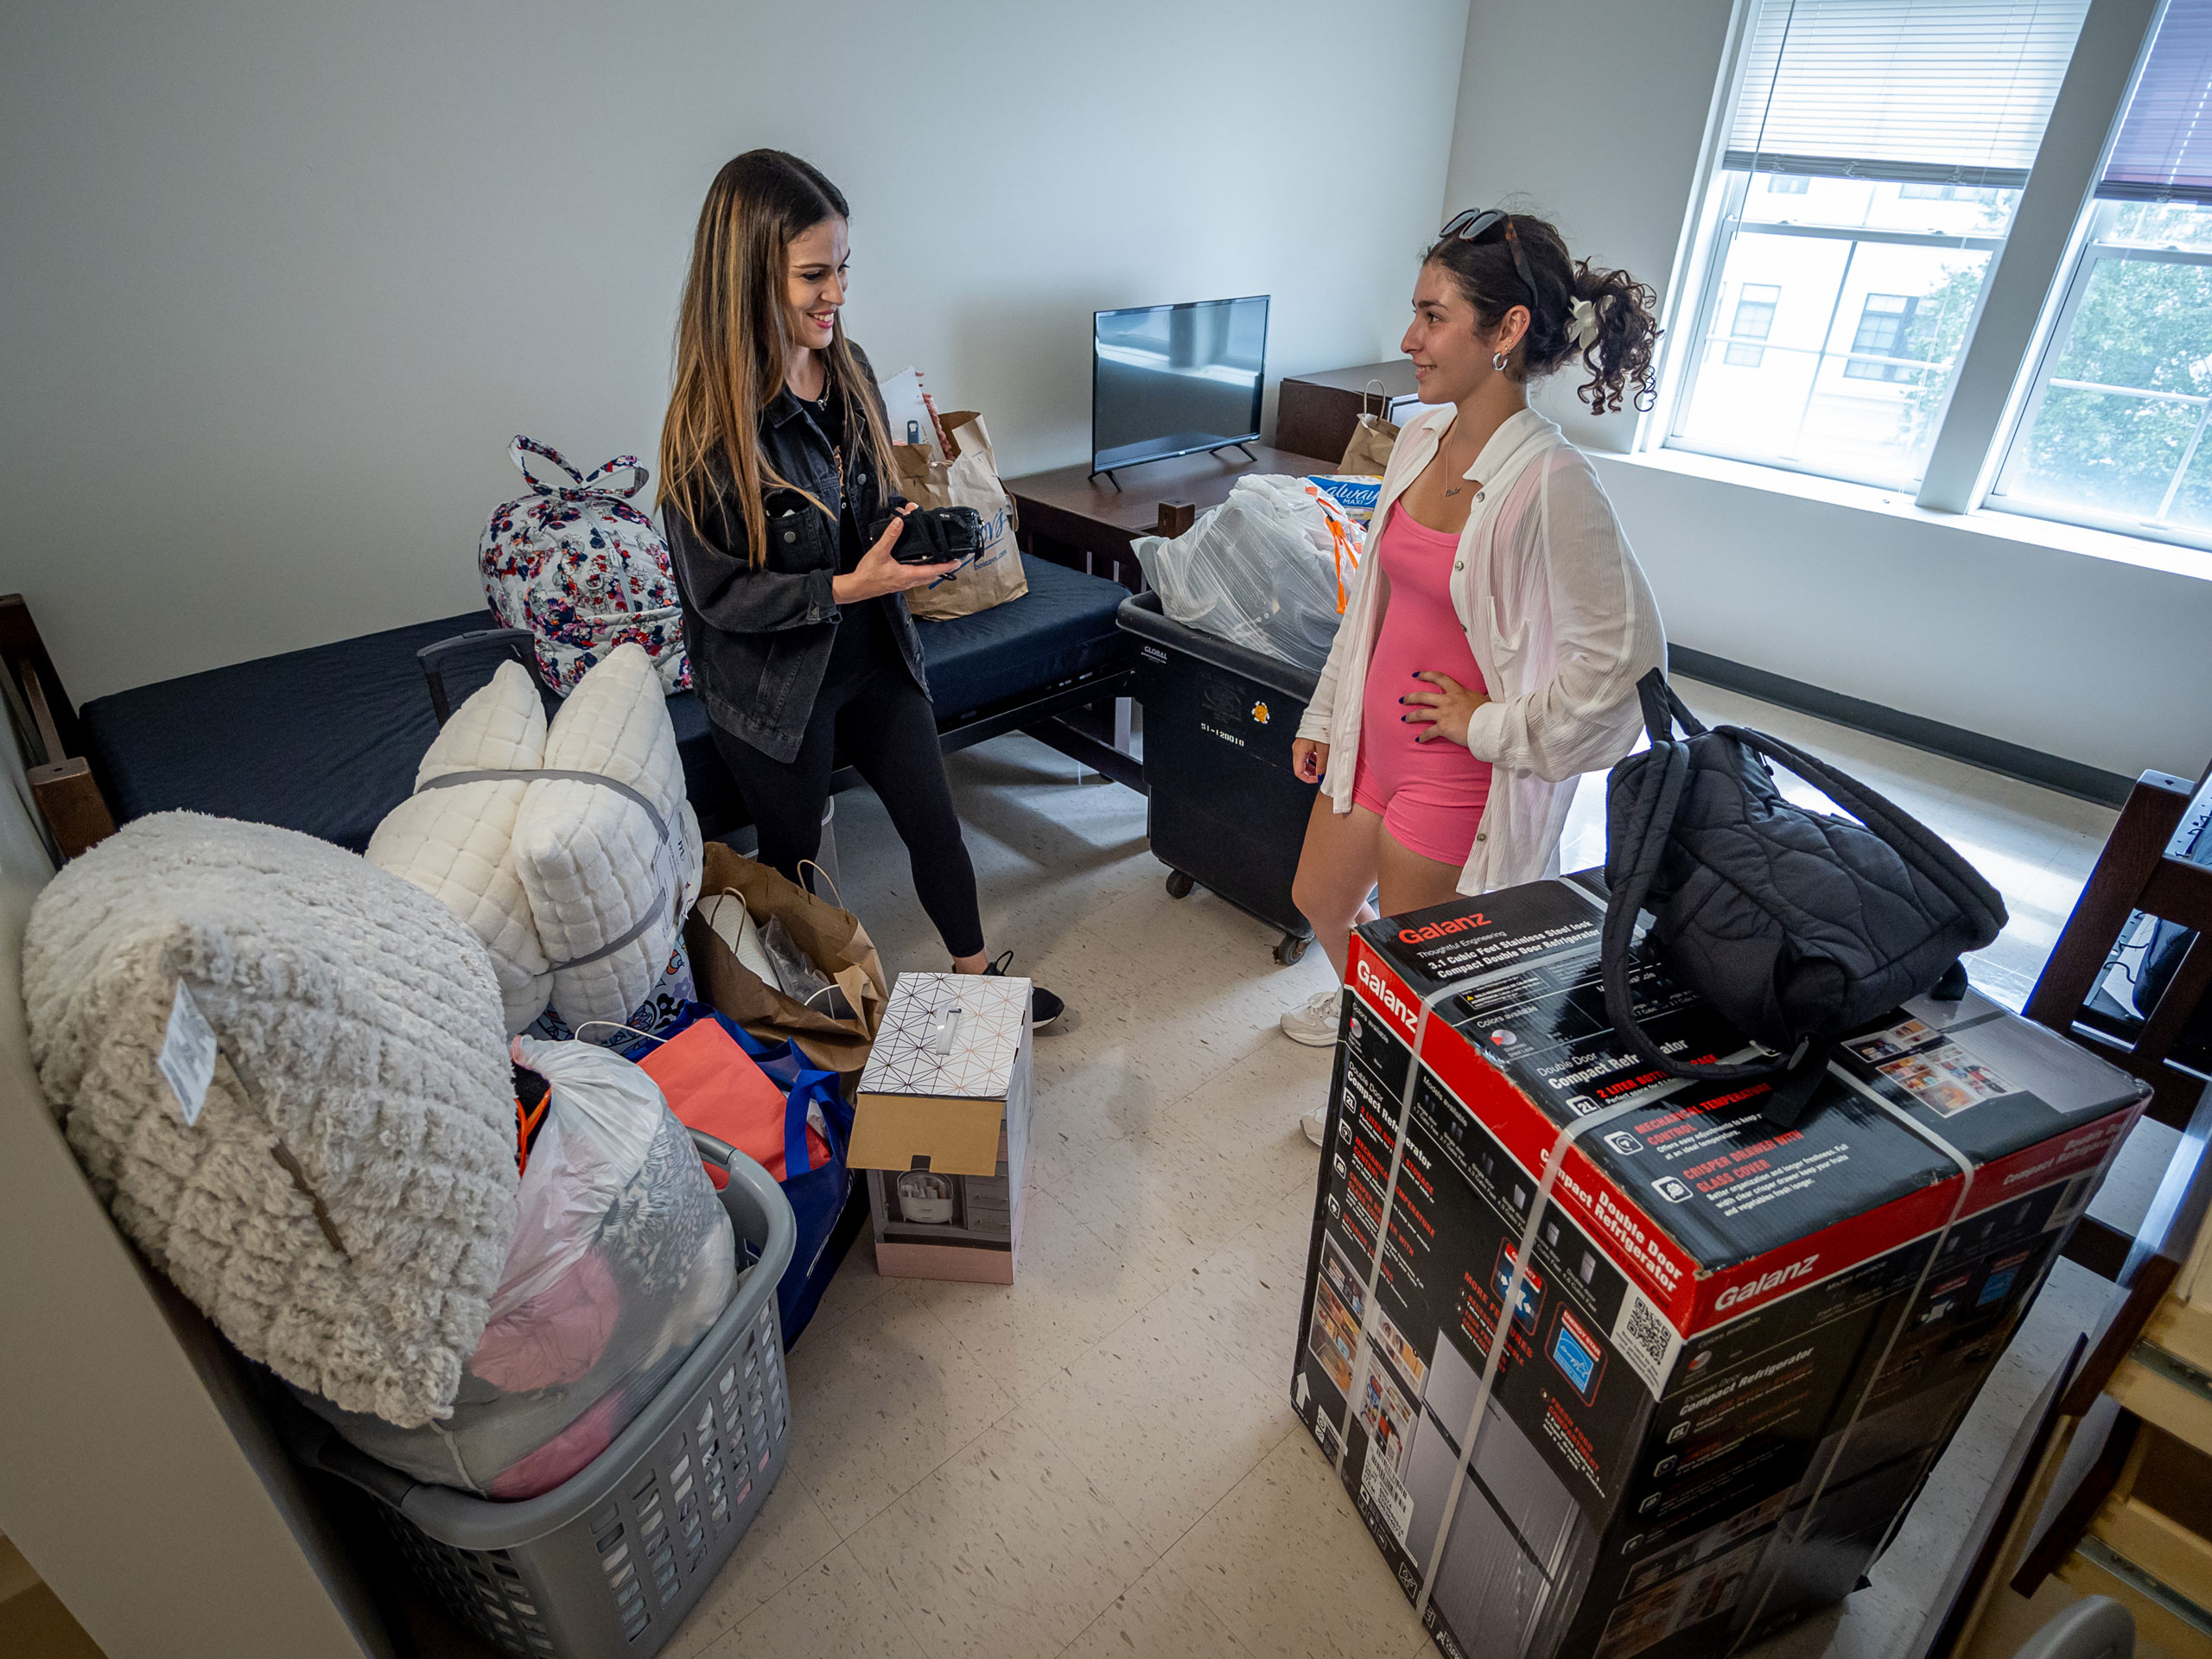 A mom and daughter in a room surrounded by belongings.